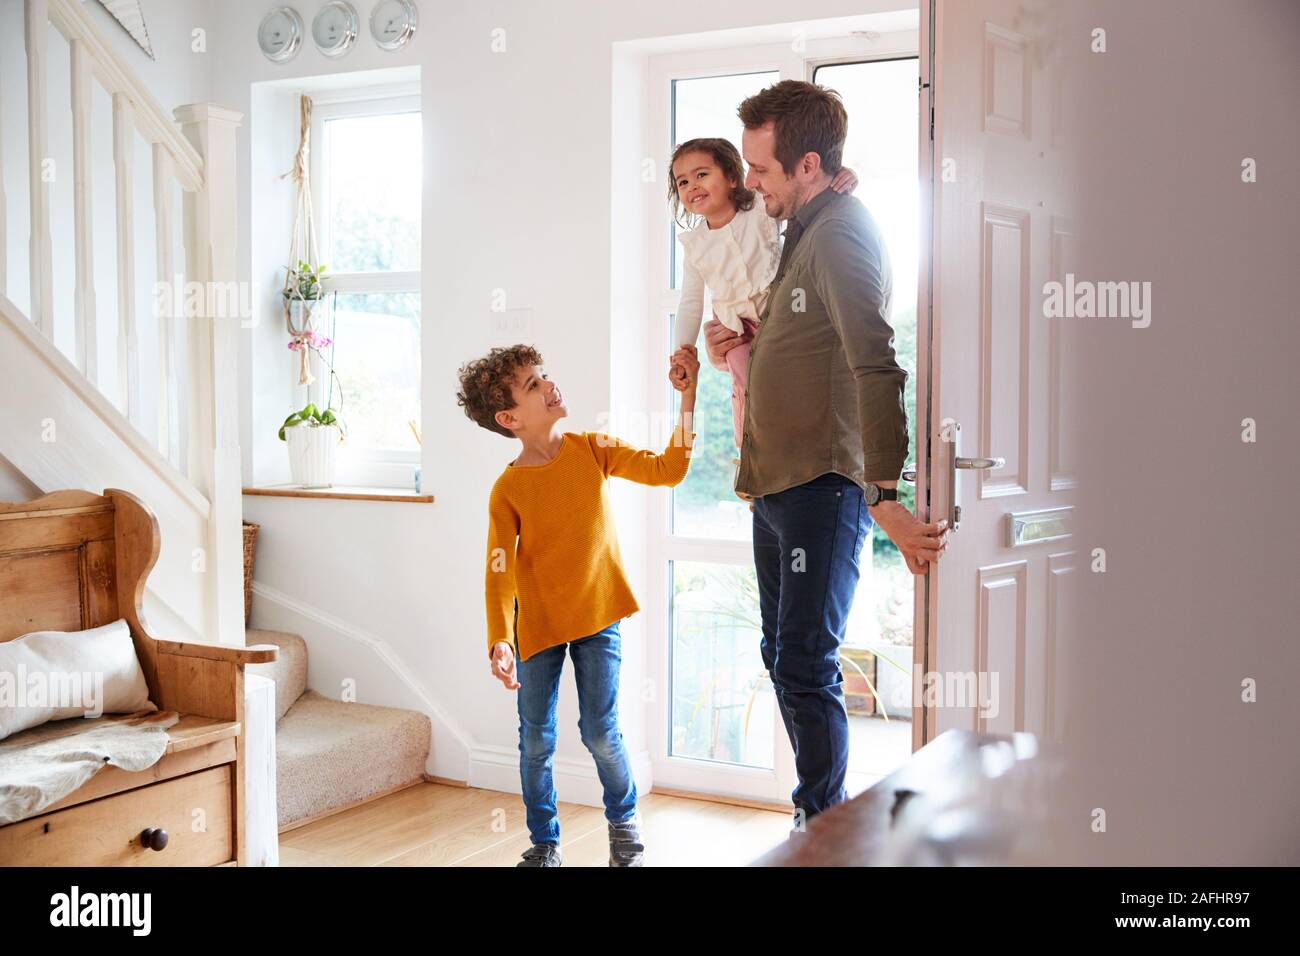 Single Father Returning Home After Trip Out With Excited Children Running Ahead Stock Photo